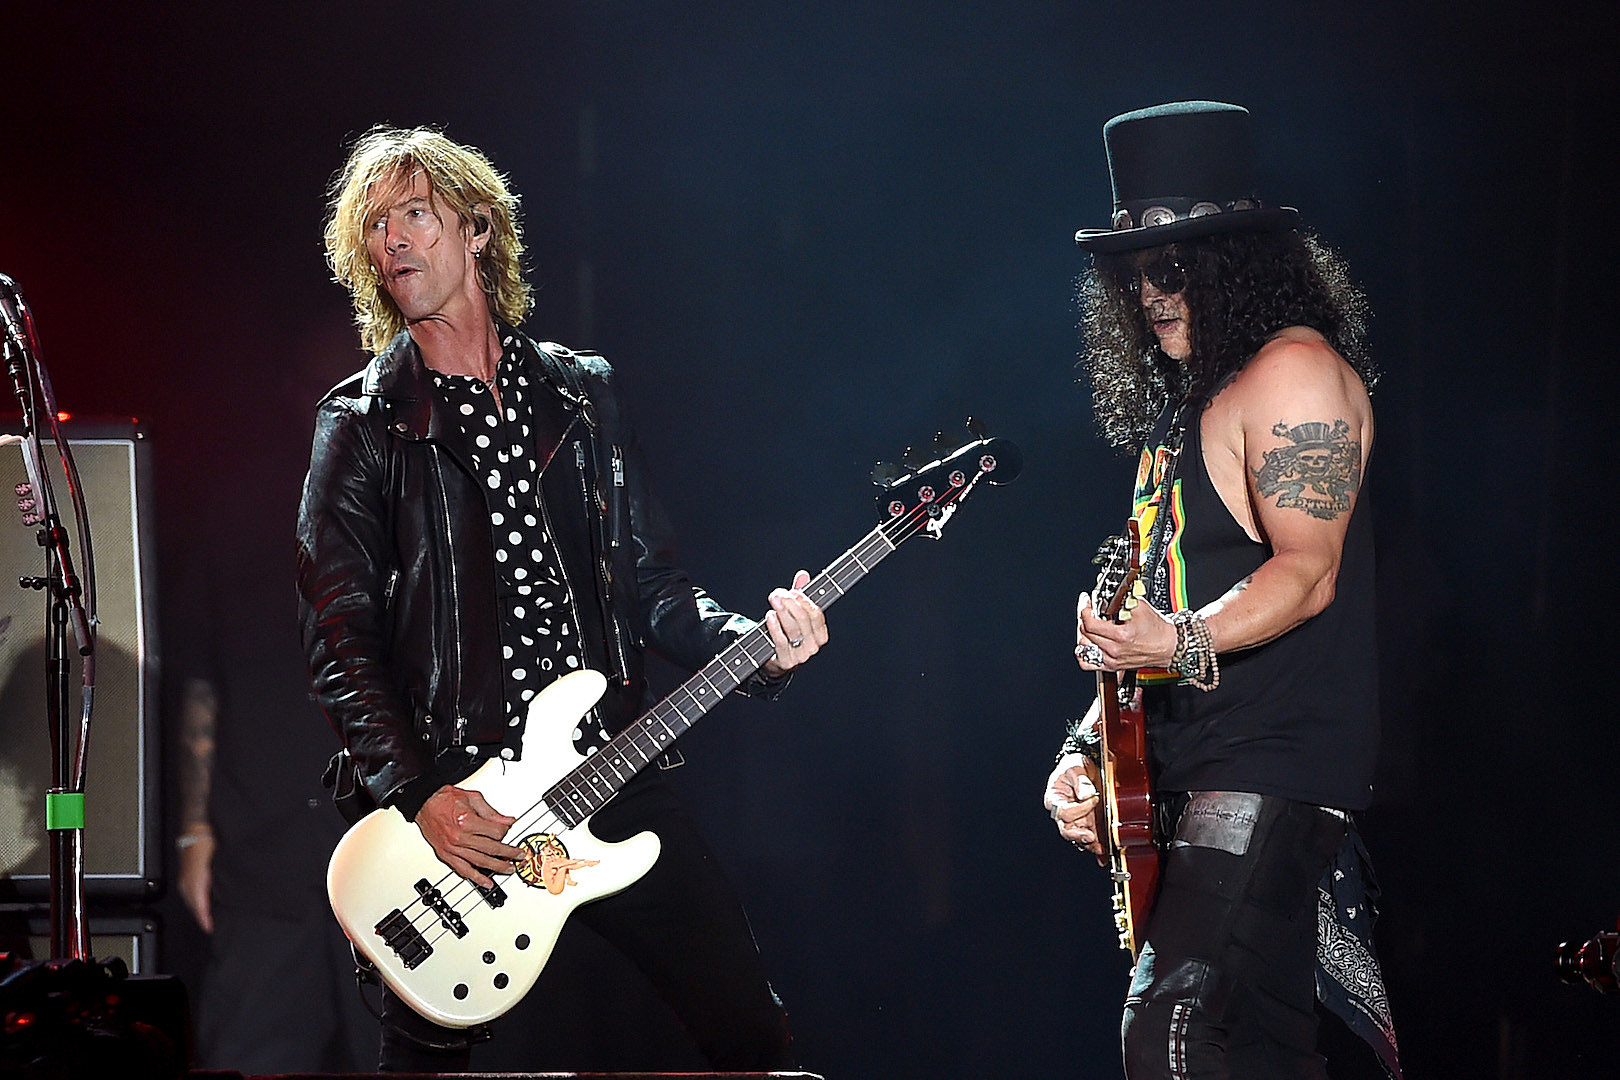 Hq Pucking In Forced - See Video of Guns N' Roses Rehearsing 'Hard School' Before Show